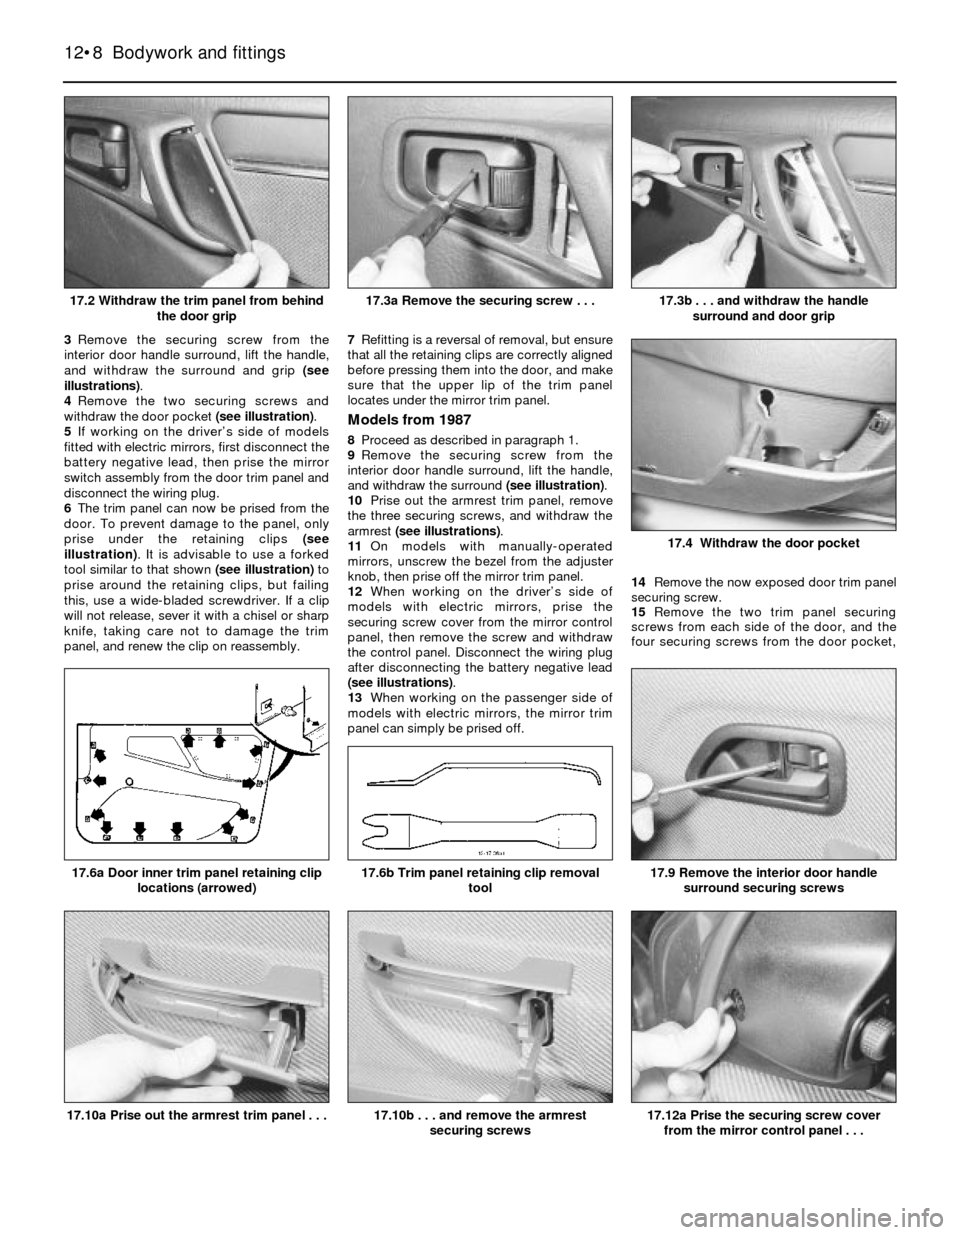 FORD SIERRA 1982 1.G Bodywork And Fittings Workshop Manual 3Remove the securing screw from the
interior door handle surround, lift the handle,
and withdraw the surround and grip (see
illustrations).
4Remove the two securing screws and
withdraw the door pocket